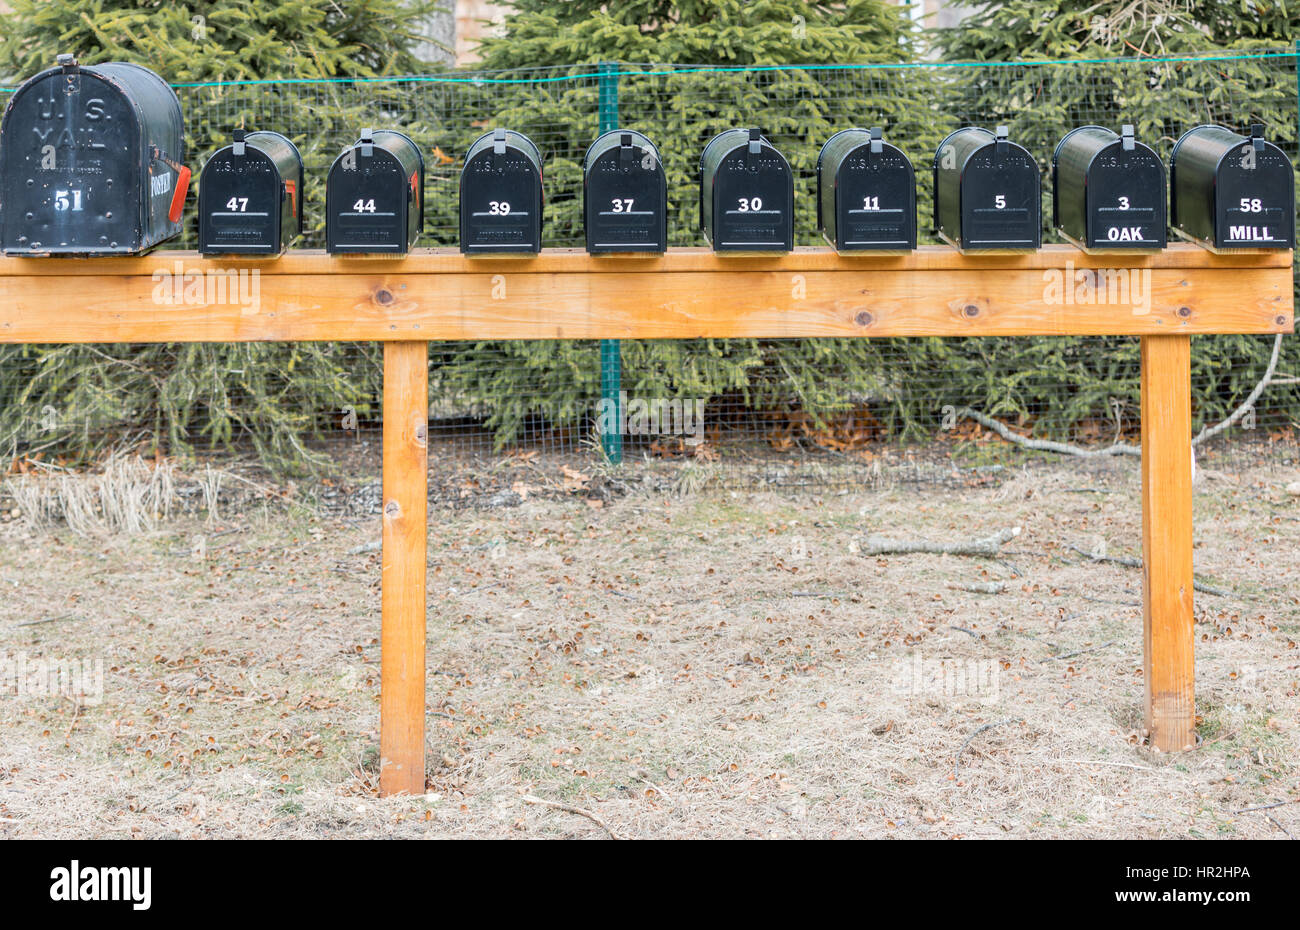 a bank of black mail boxes with numbers Stock Photo